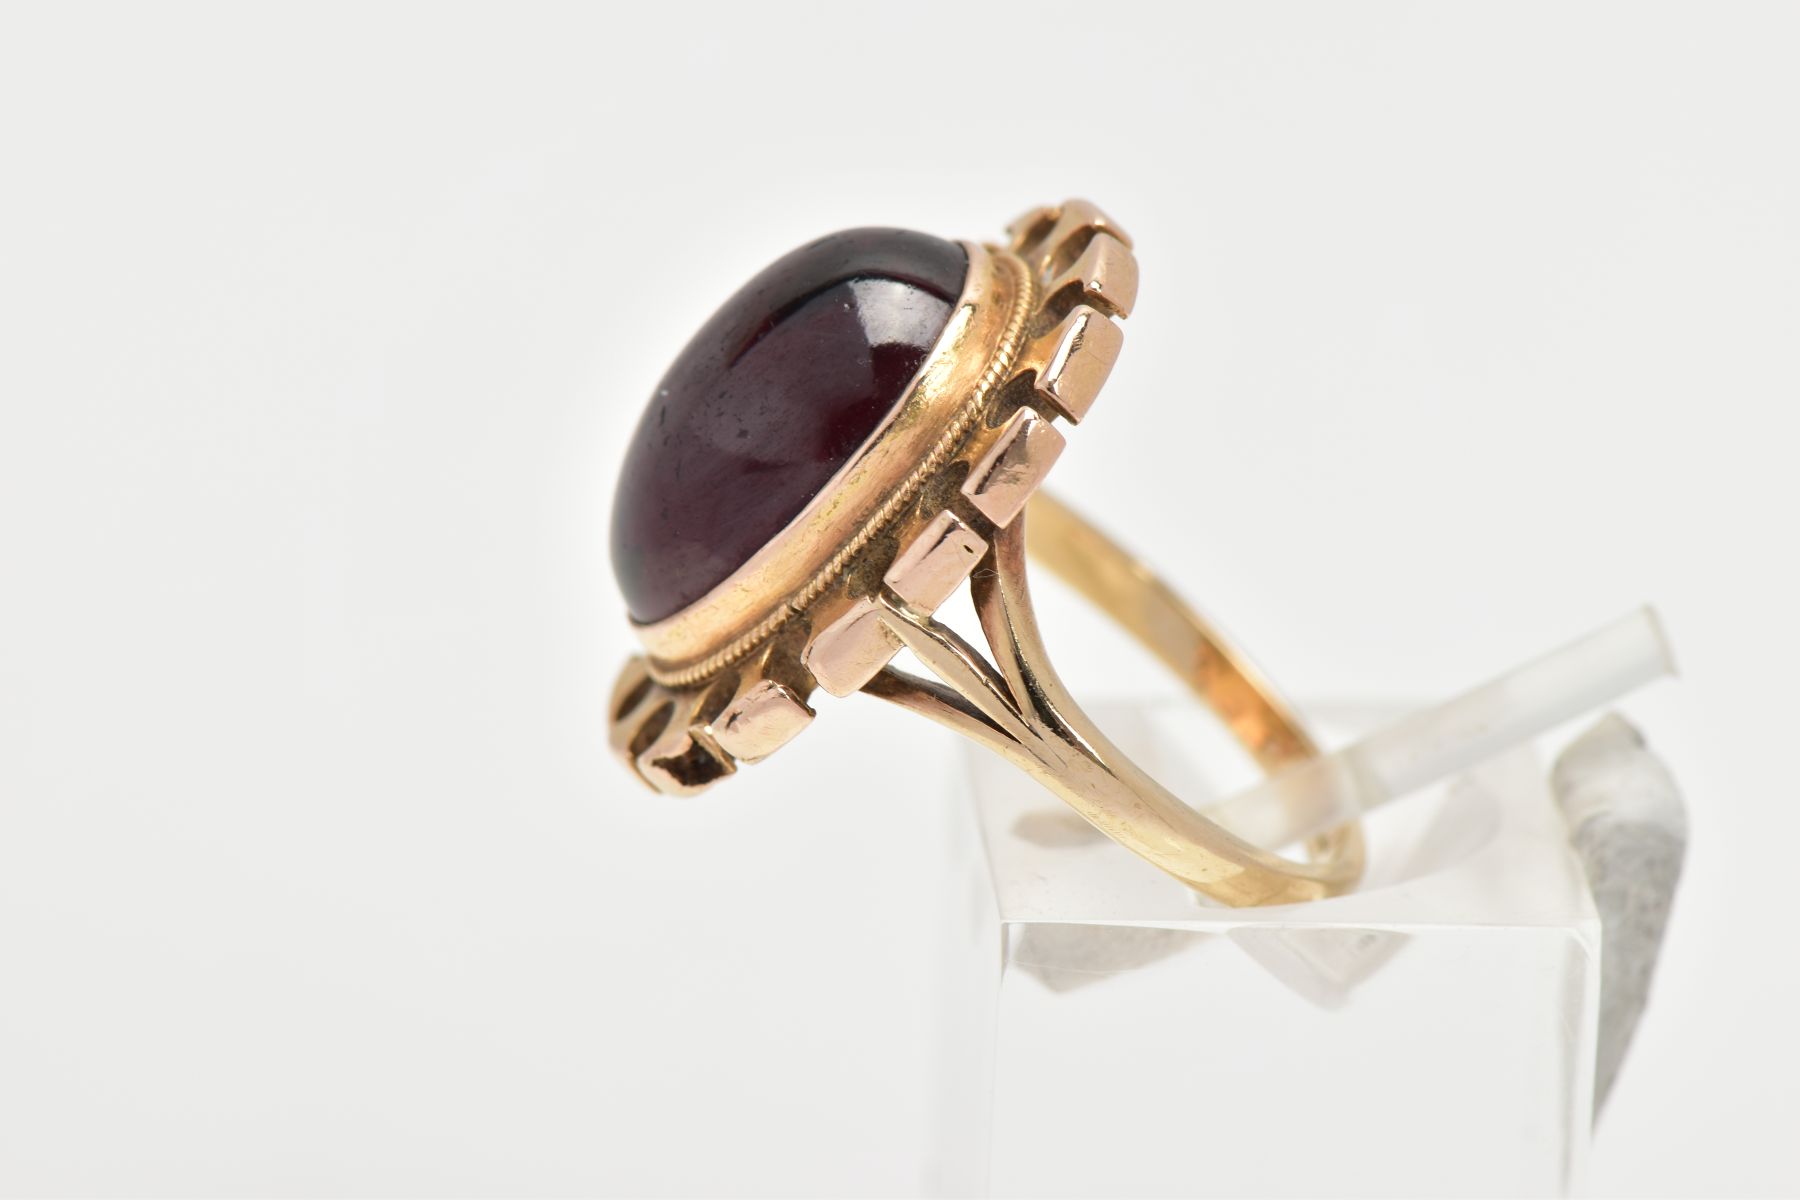 A YELLOW METAL GARNET RING, of an oval form set with an oval garnet cabochon, bezel set with a - Image 2 of 4